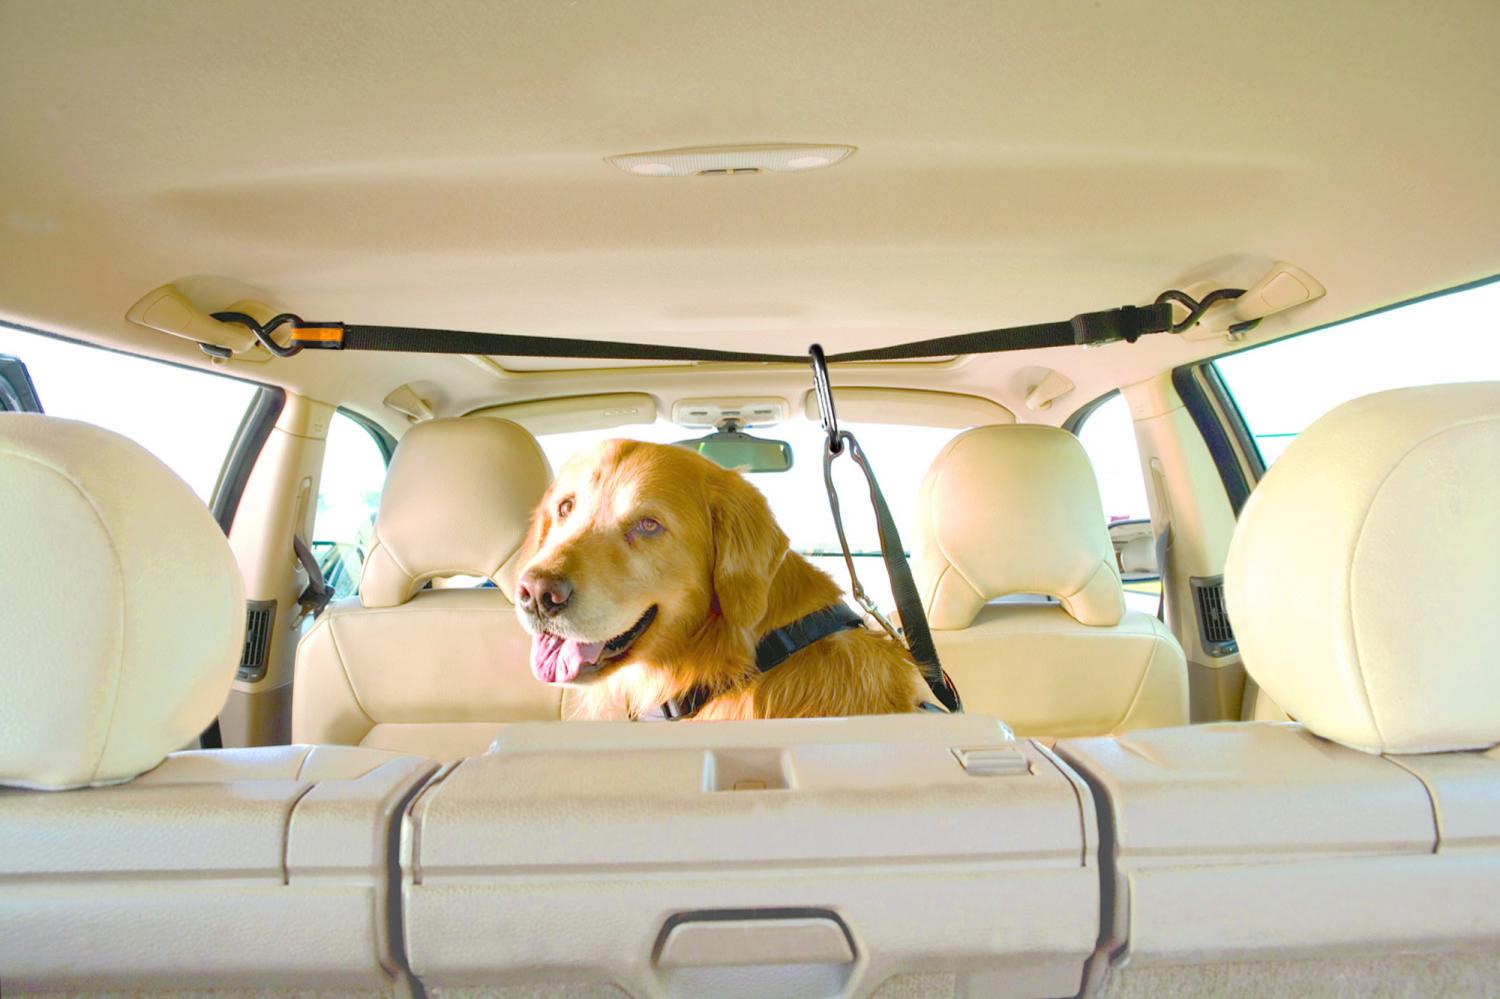 Dog Car Zipline - Safety Auto zip line for dogs